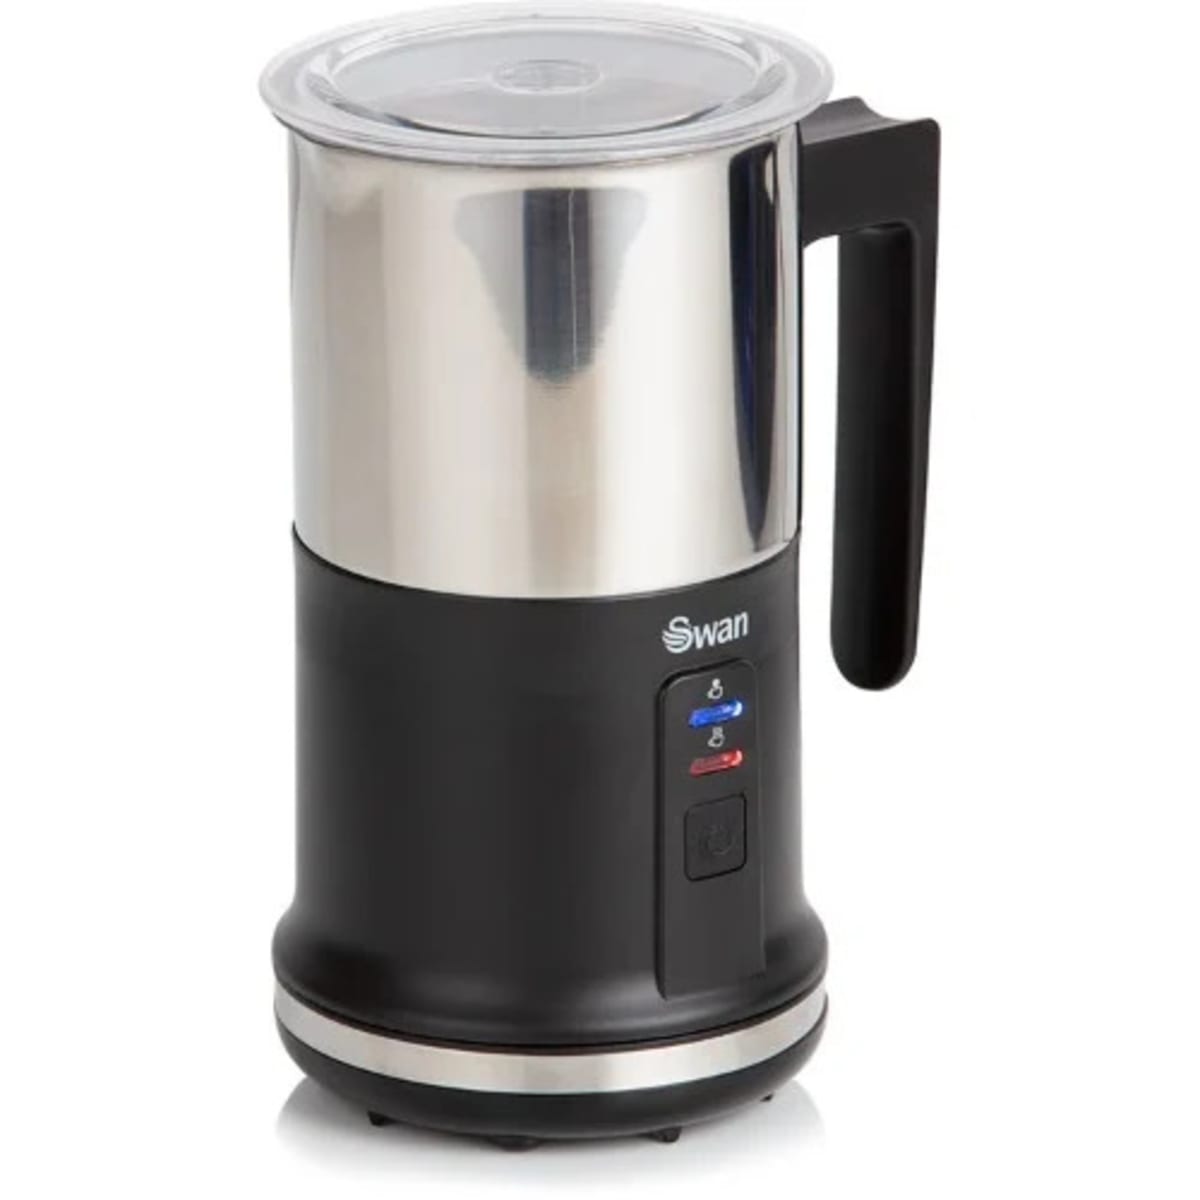 Swan Automatic Milk Frother And Warmer - 2 Layer Non-stick Coating